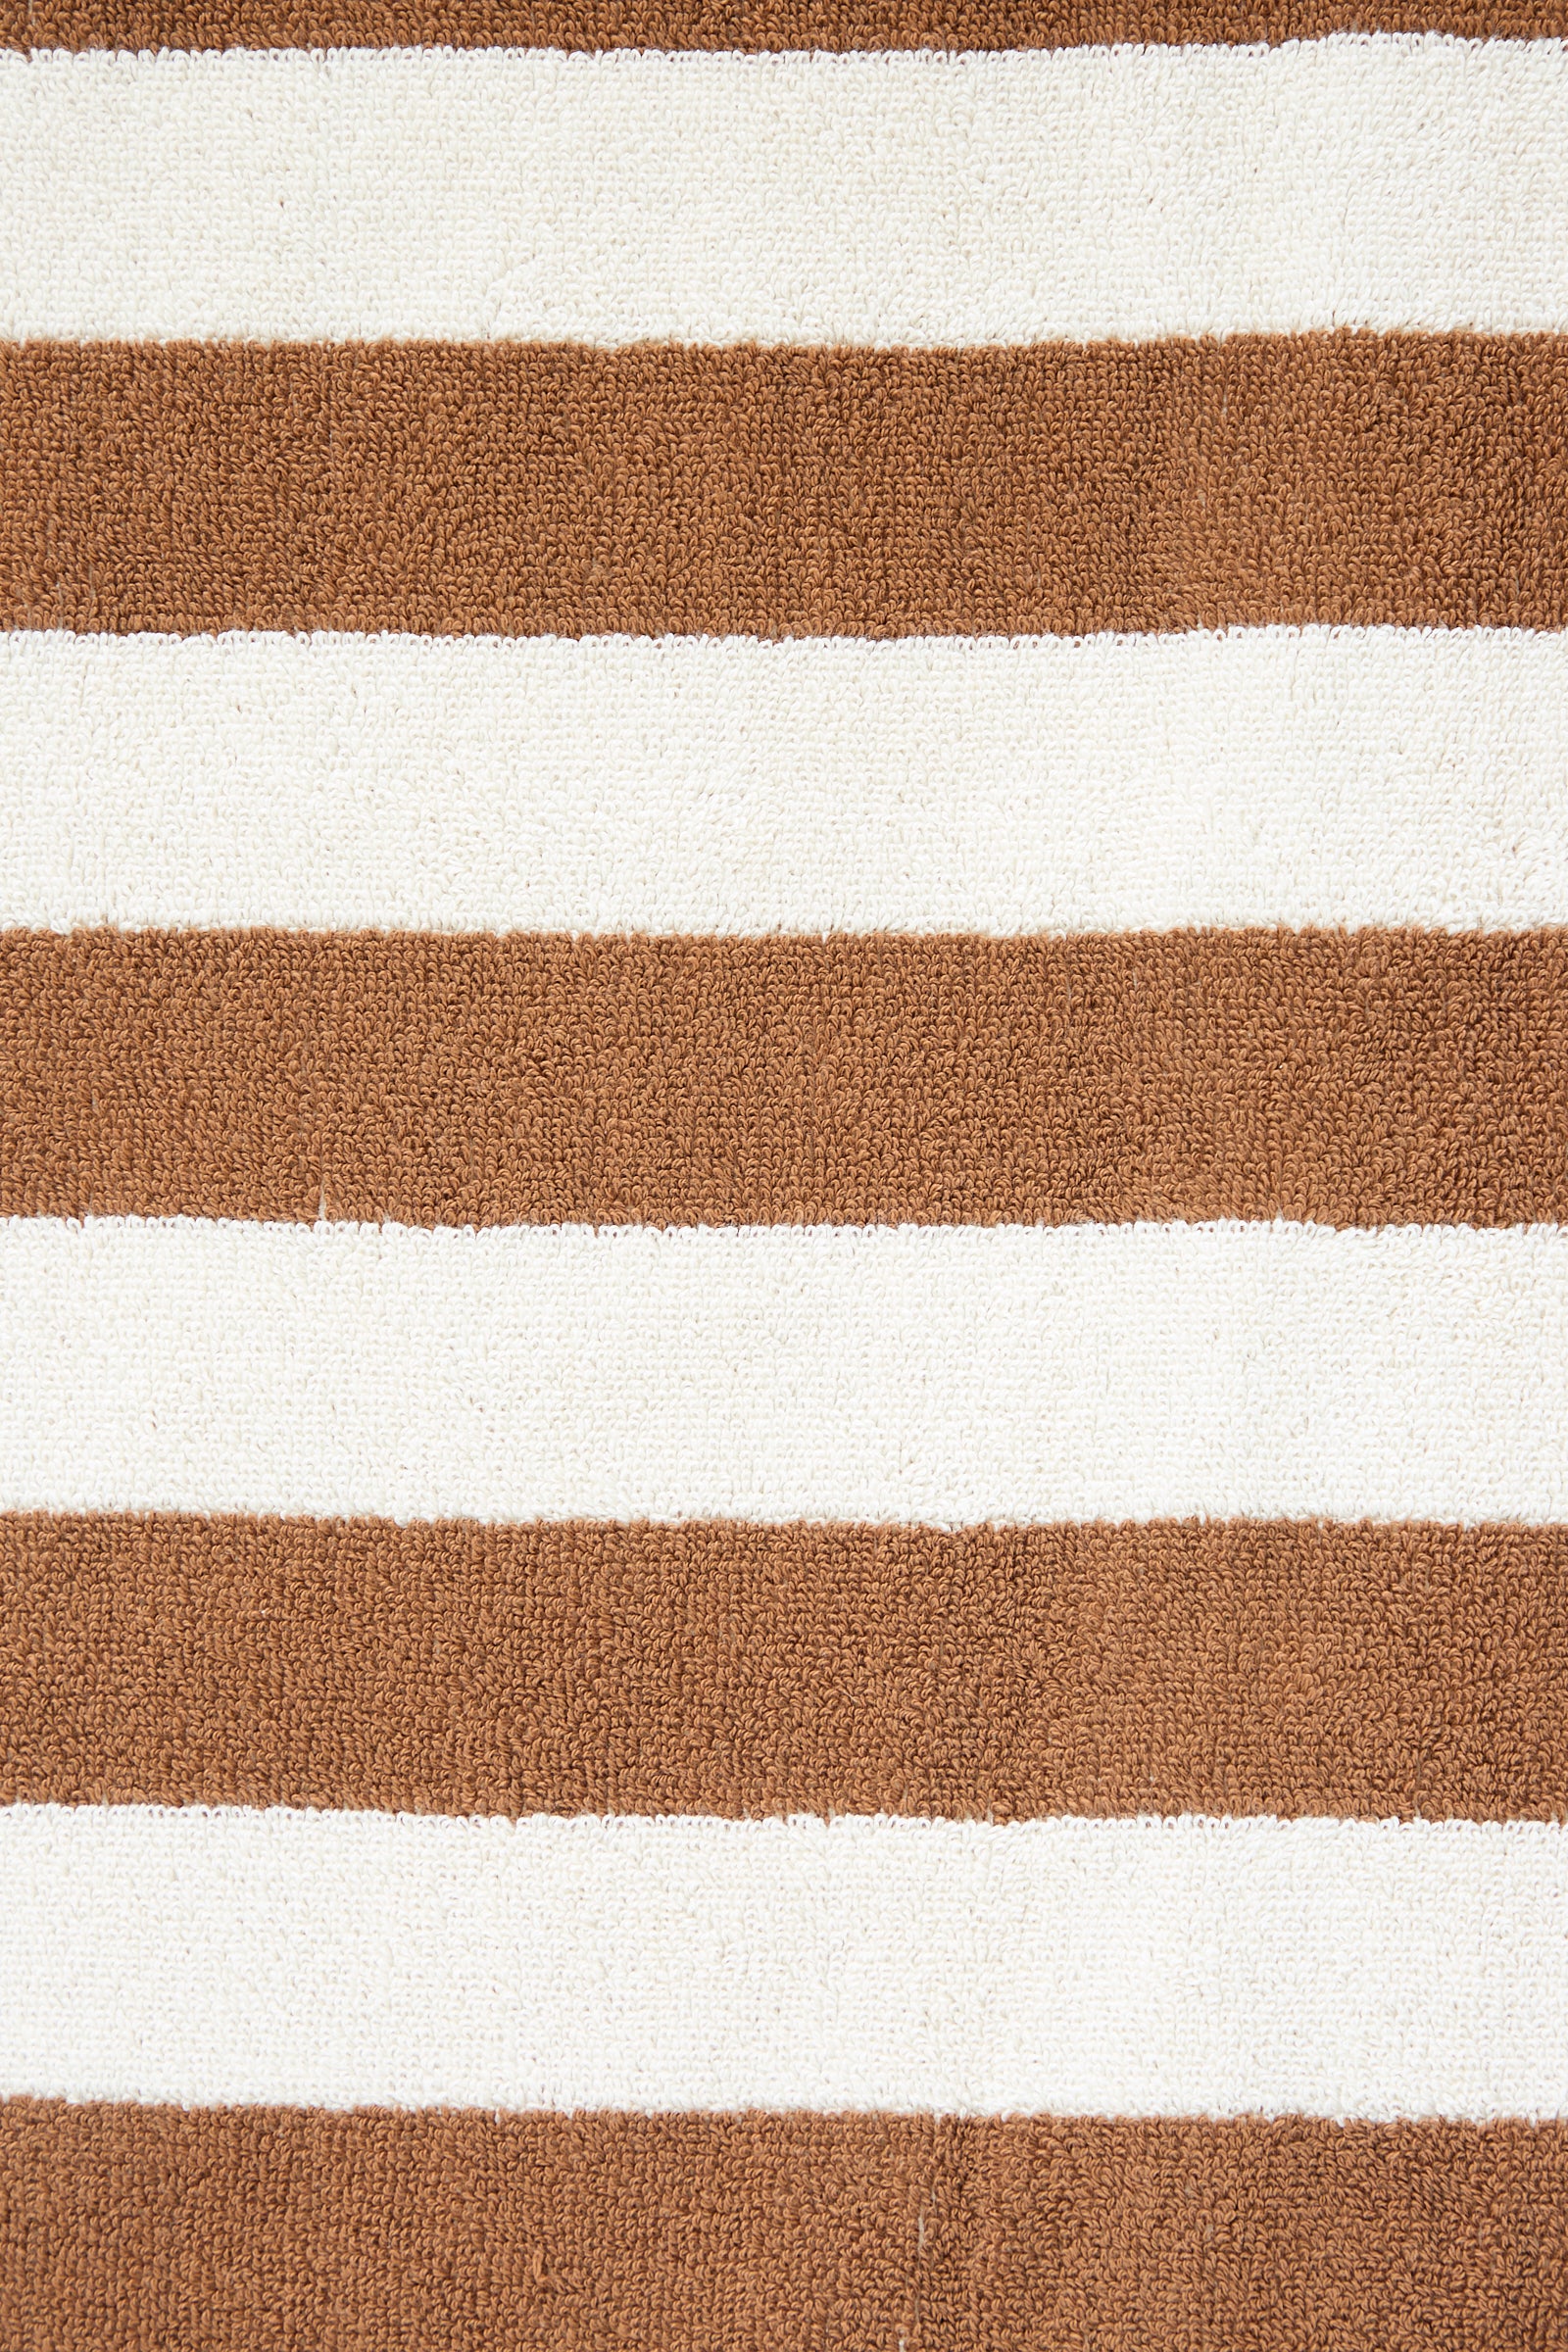 Close-up of an oversized Maria Pool Towel made with organic cotton, featuring alternating horizontal brown and white stripes by Autumn Sonata.